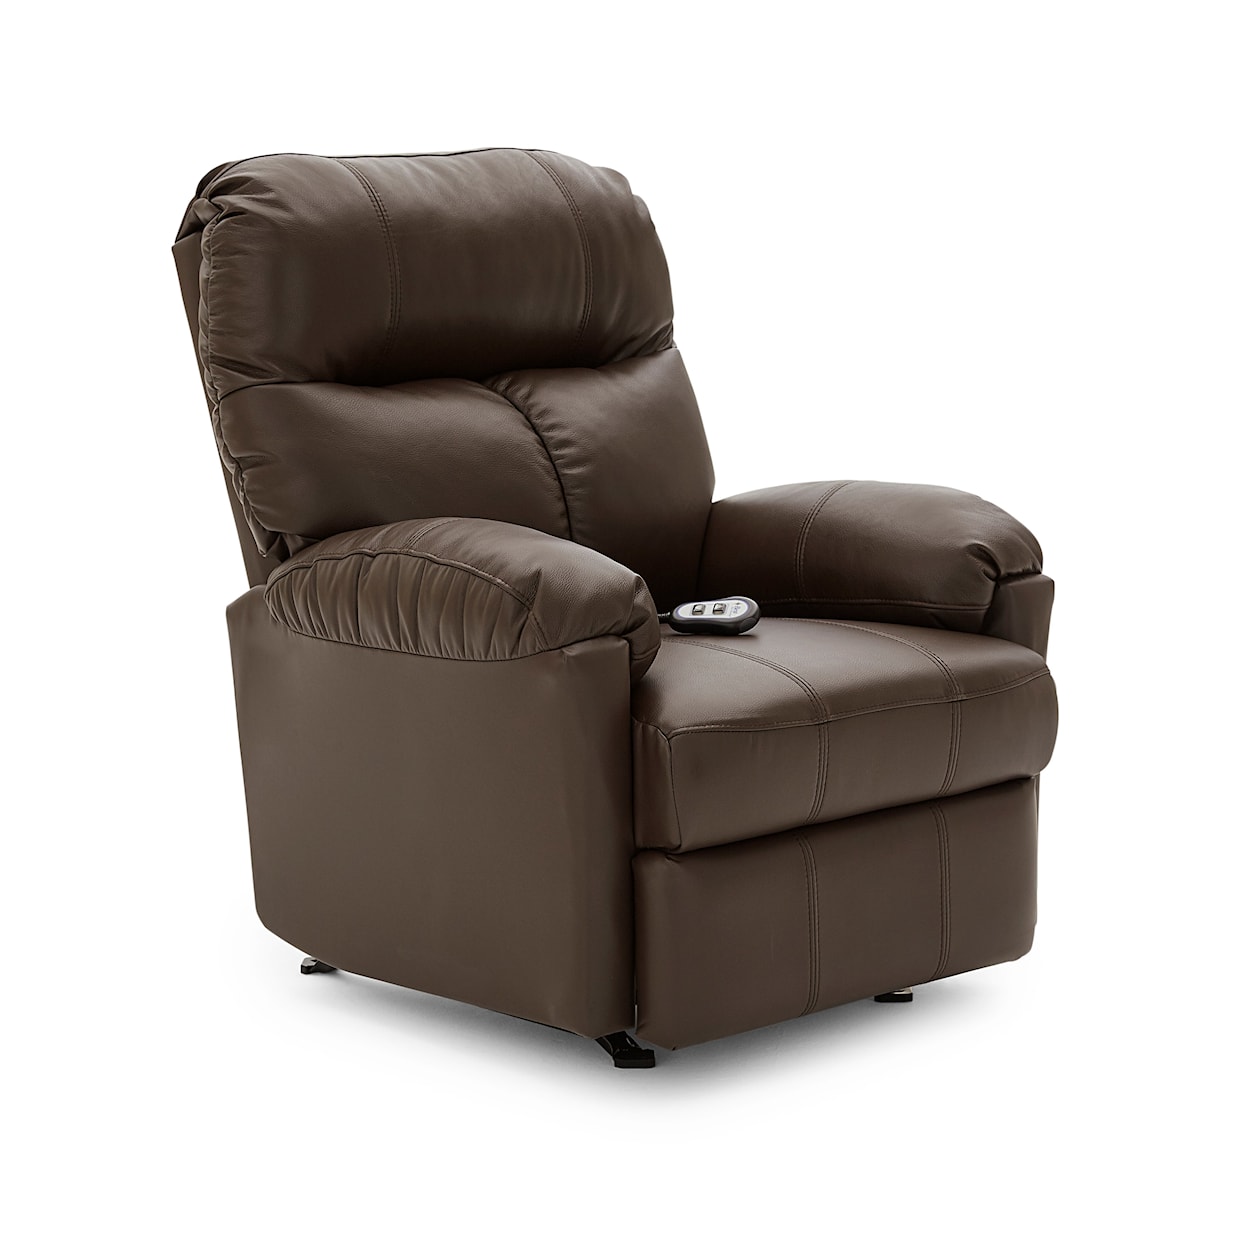 Best Home Furnishings Picot Space Saver Recliner